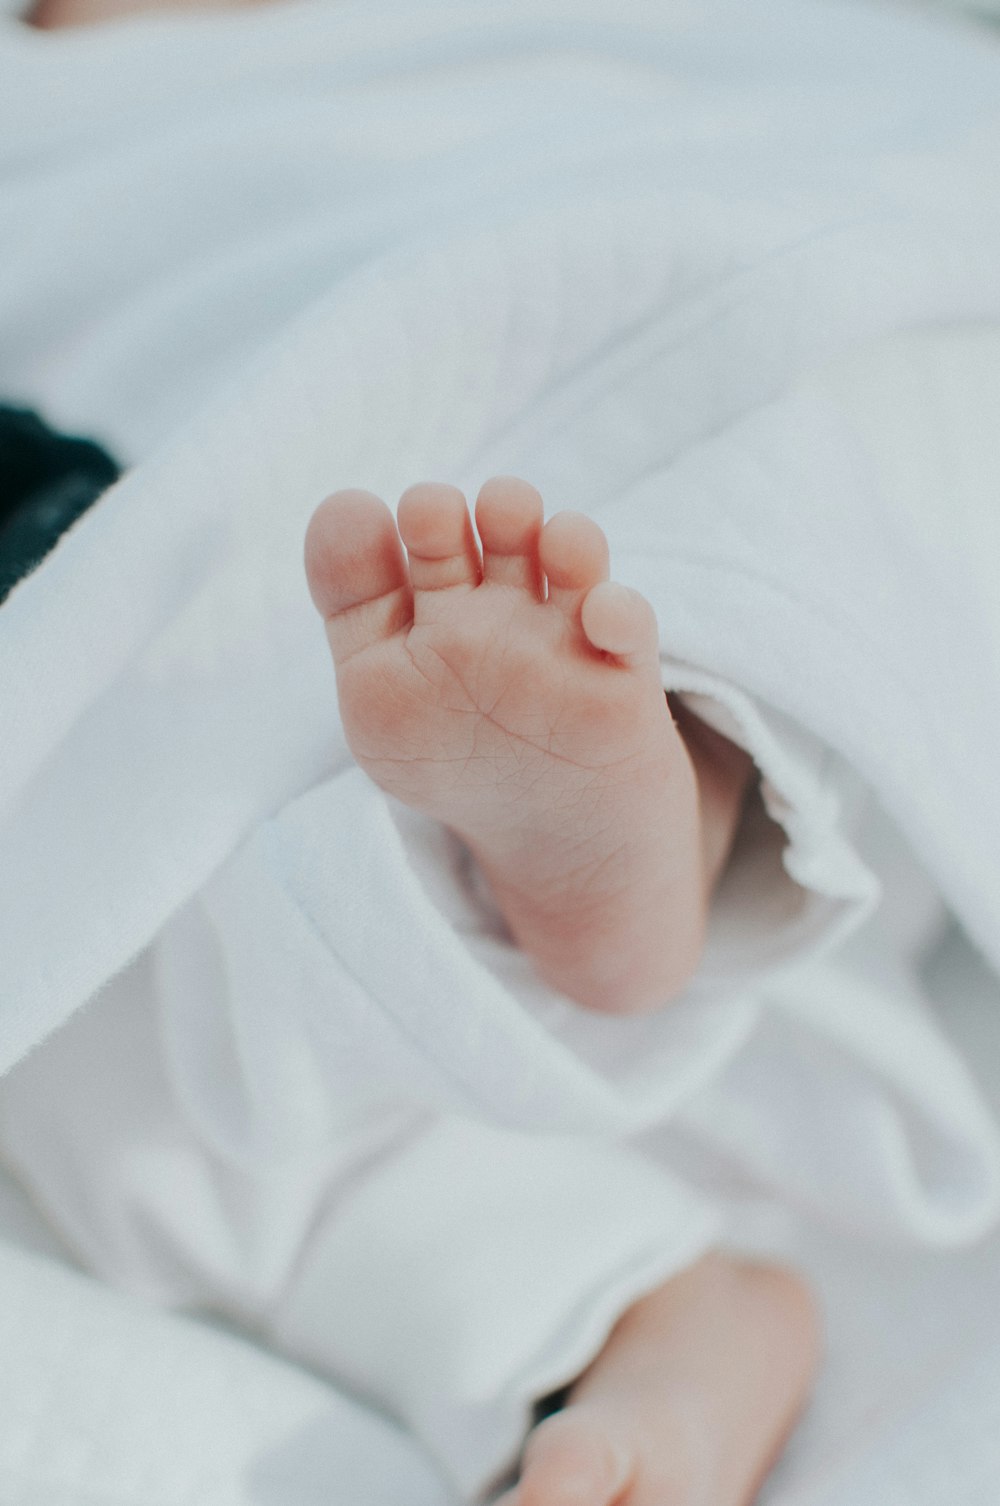 a close up of a baby's foot under a blanket